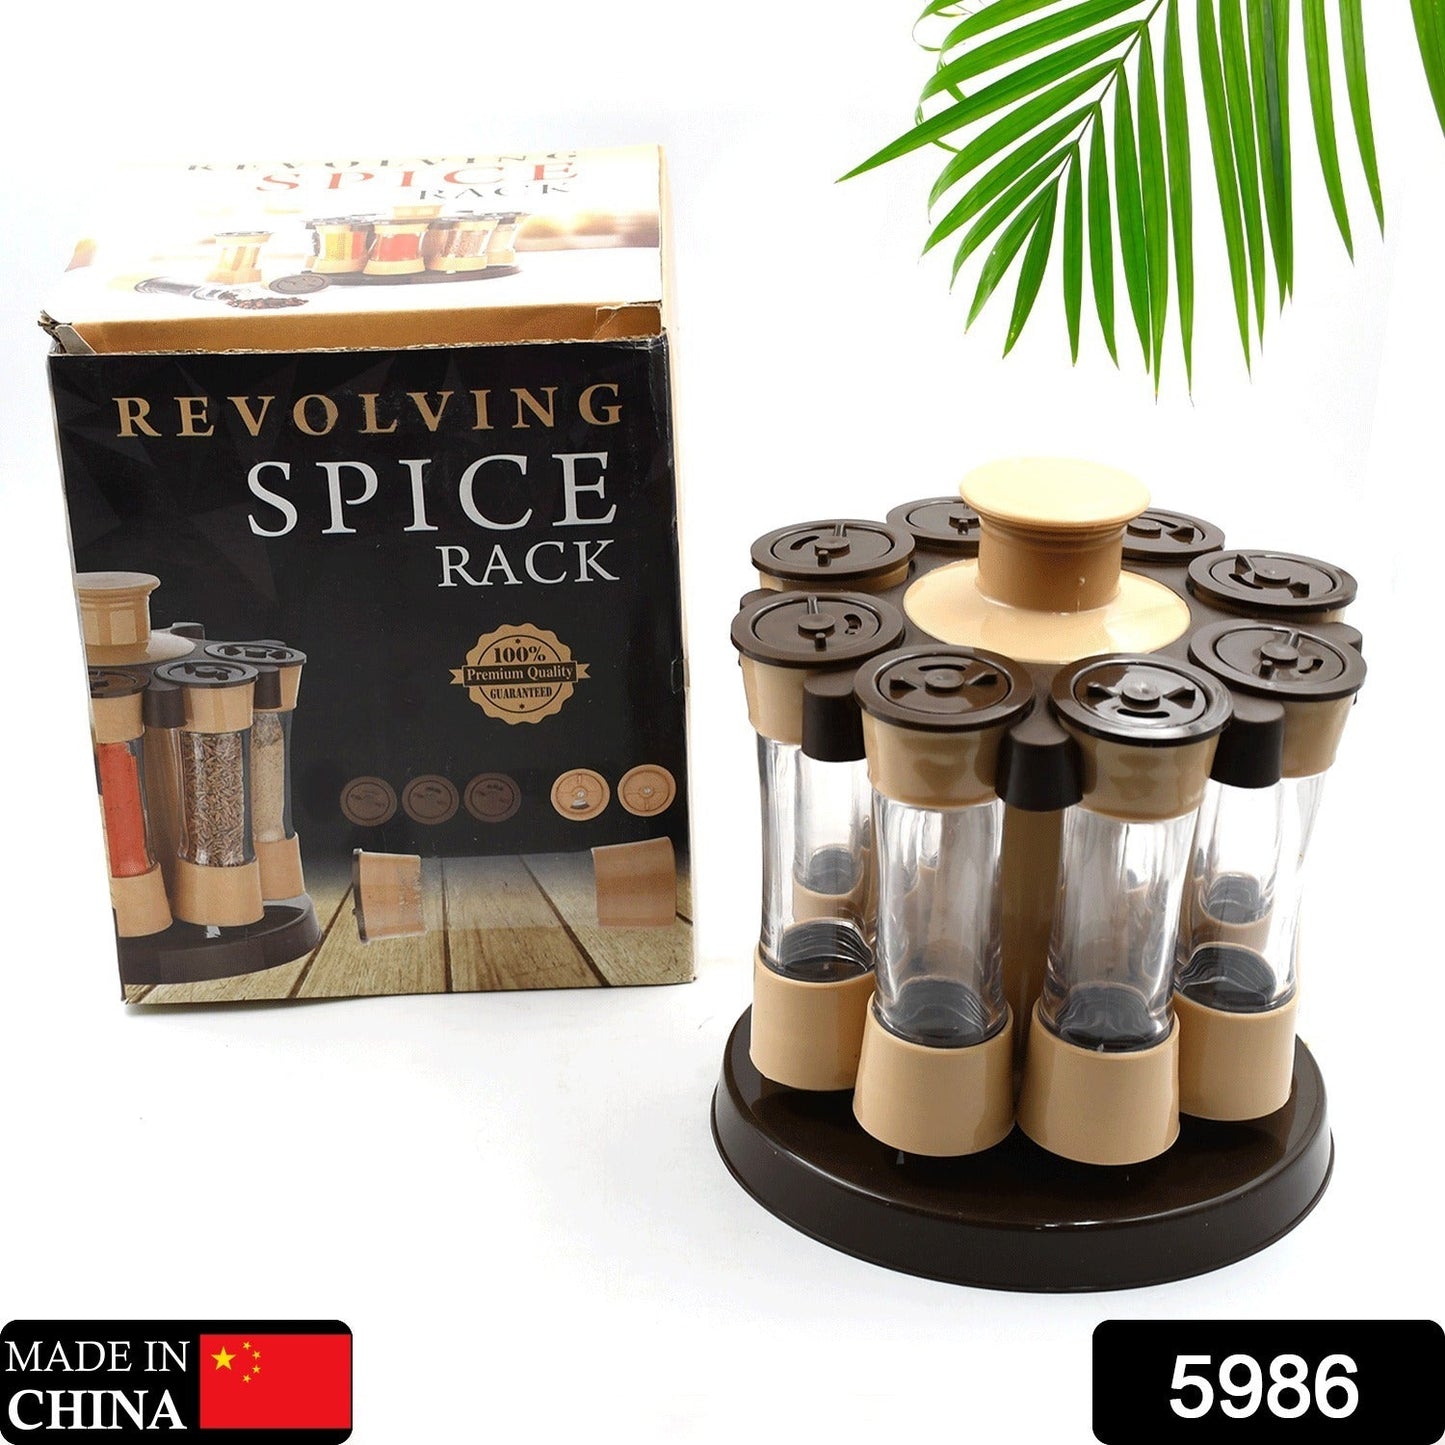 5986  360 Revolving Spice Rack for Kitchen and Dining Table, 8 Spice jars with 120 ml, Condiment Set, Herb Seasoning Organizer